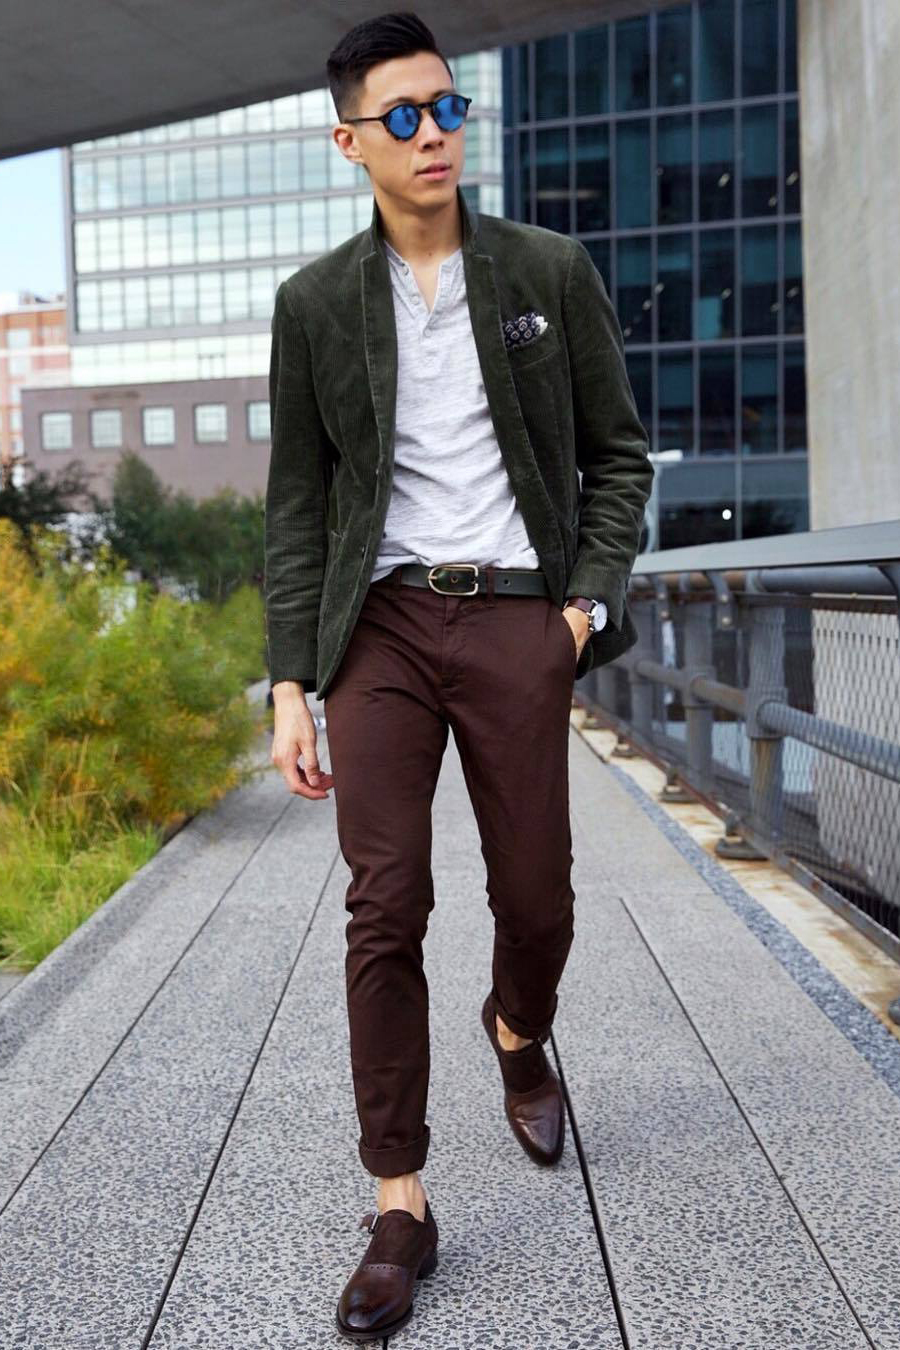 Green blazer, gray henley shirt, brown chinos, and brown monks outfit